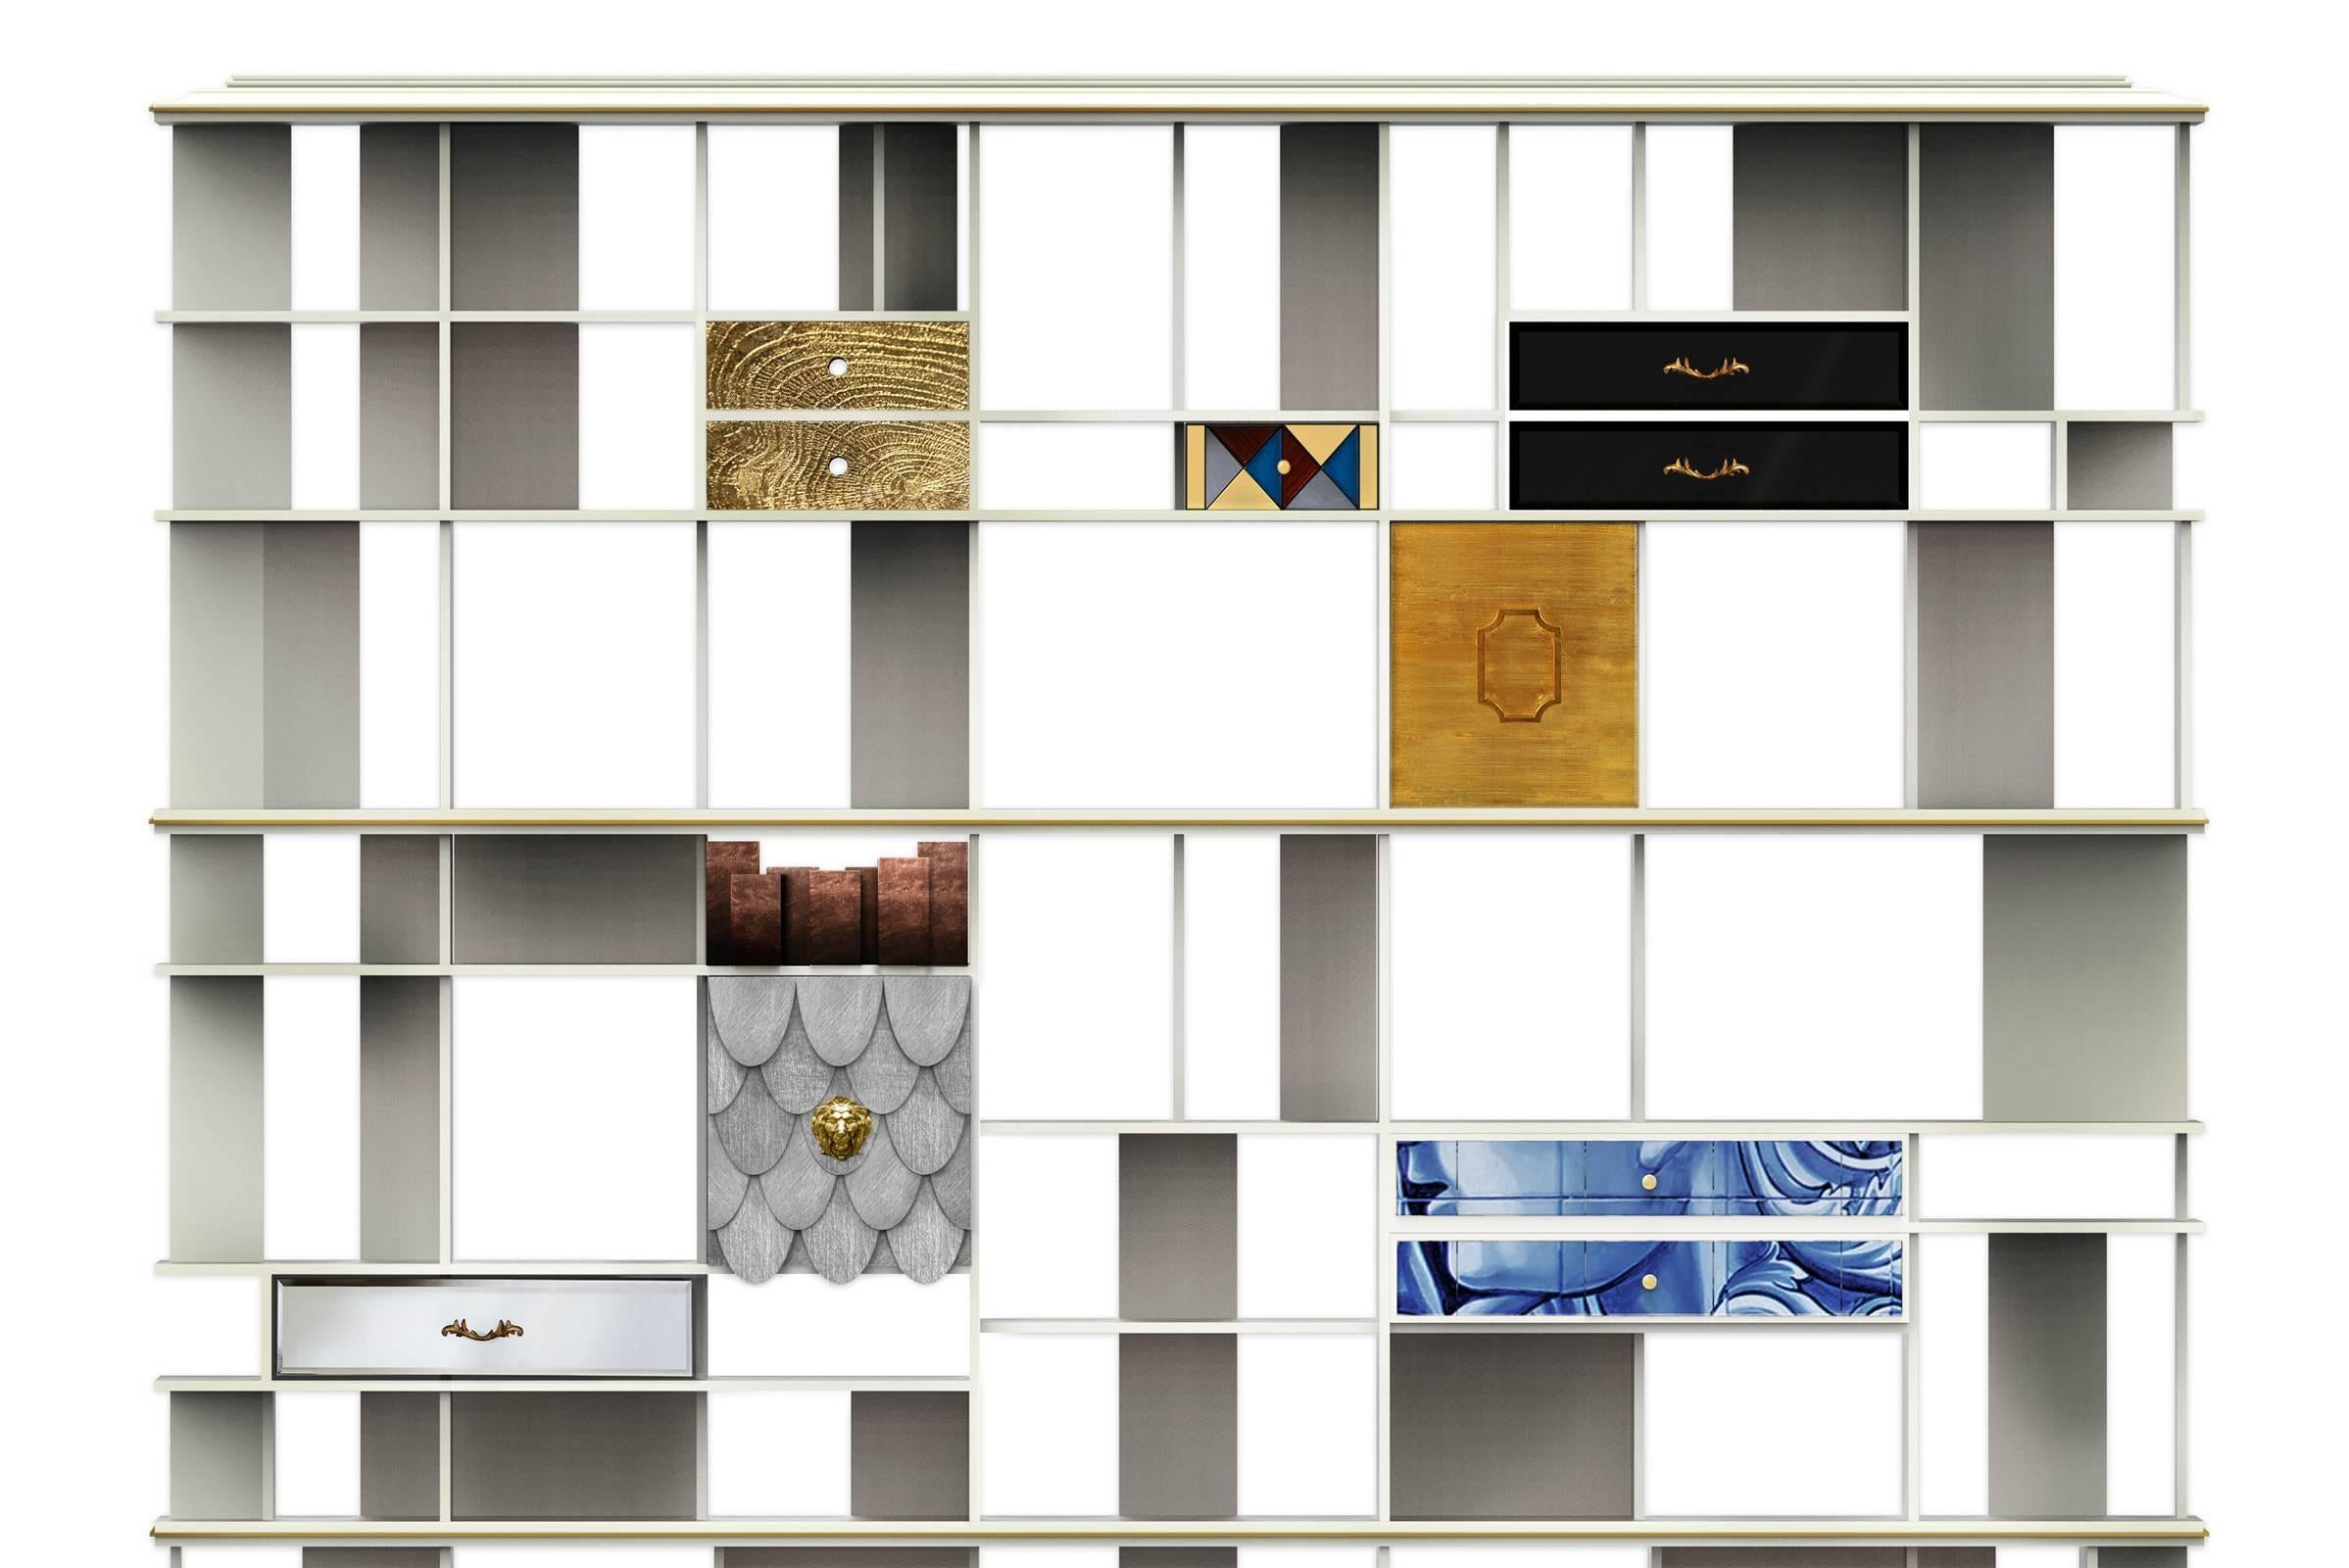 Bookshelves designed in lacquered wood with silver and copper
leaf details, ceramics and Portuguese tiles and glass. Handcrafted
technics of joinery, marquetry, carving, glass work, lacquering,
lacquering and foundry. Exceptional piece.

  
   